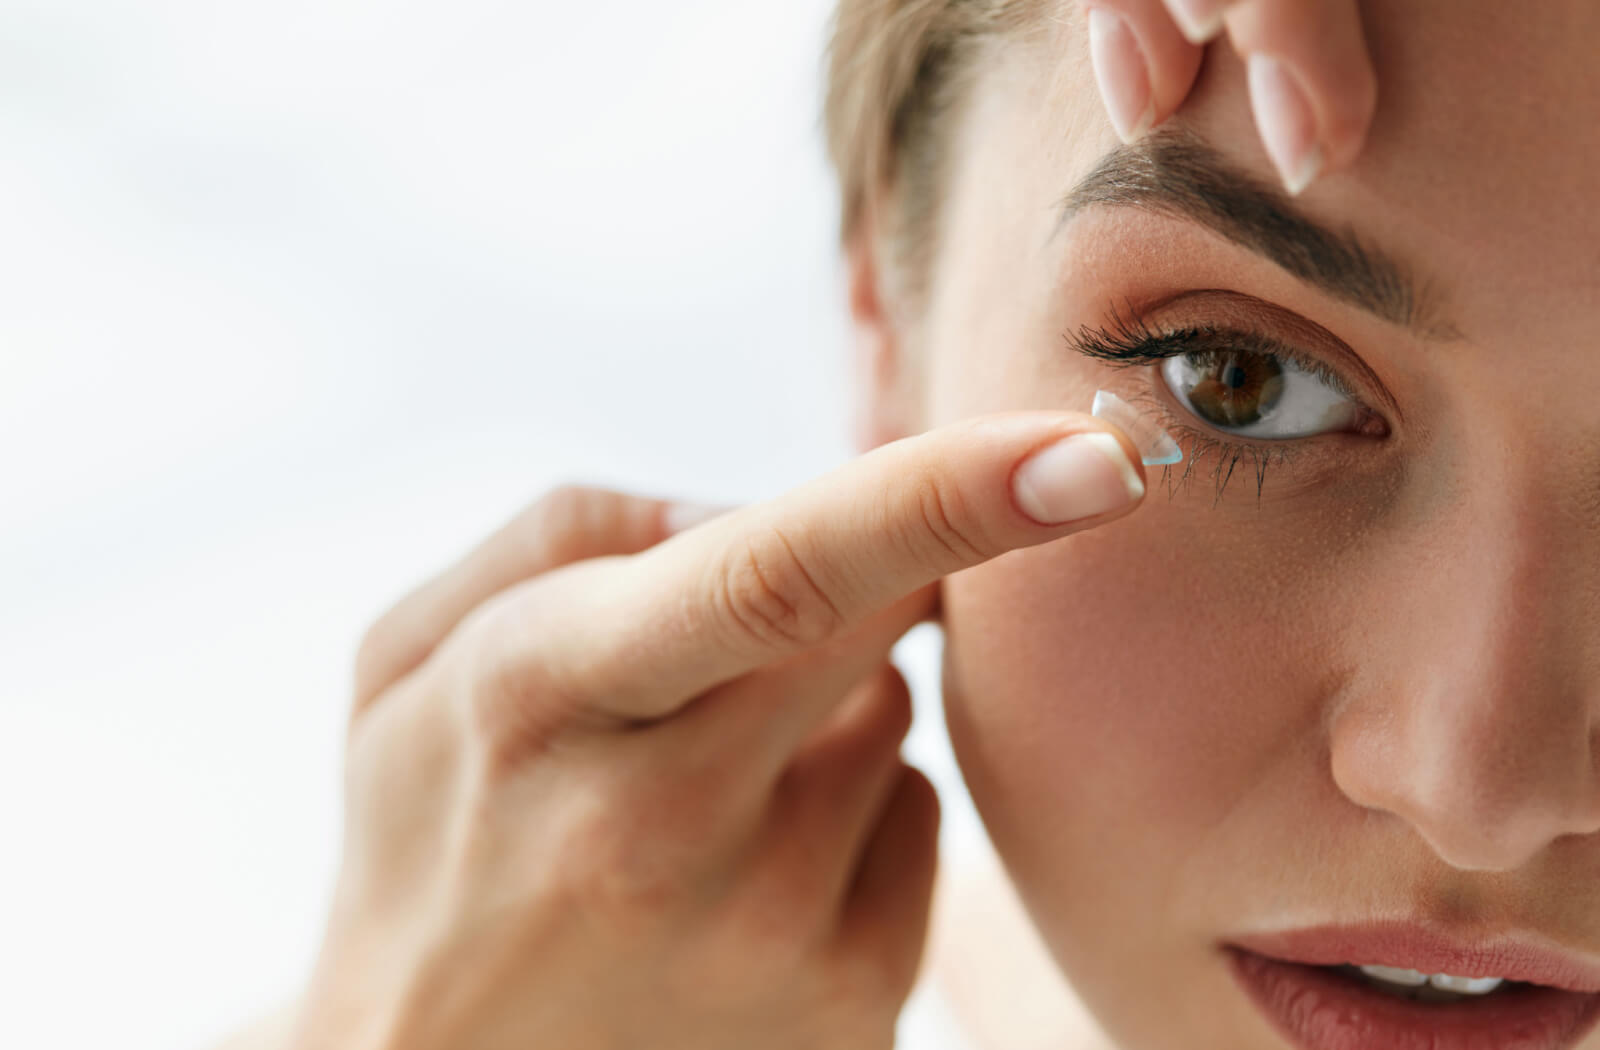 Quick and Easy Tips for Removing a Stuck Contact Lens Safely